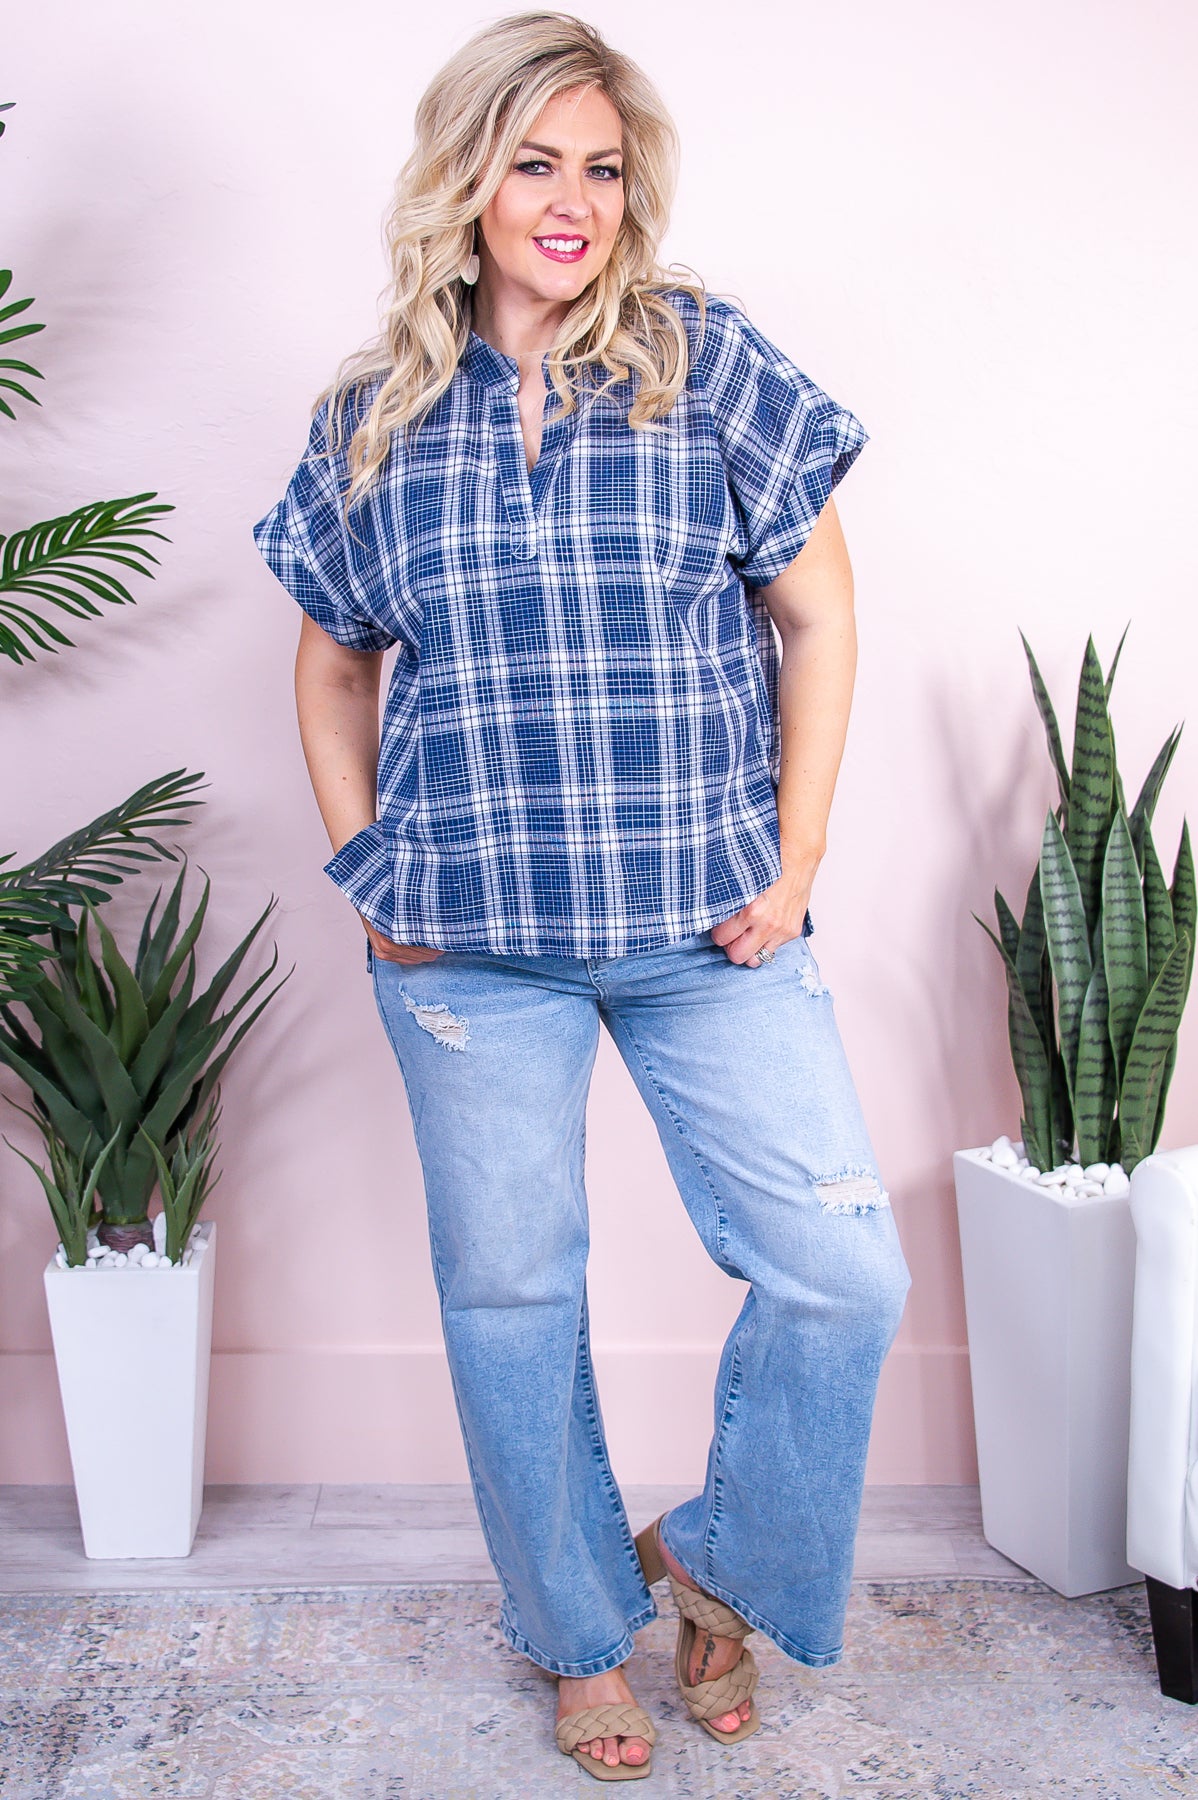 Storybook Style Navy/White Plaid High-Low Top - T9461NV